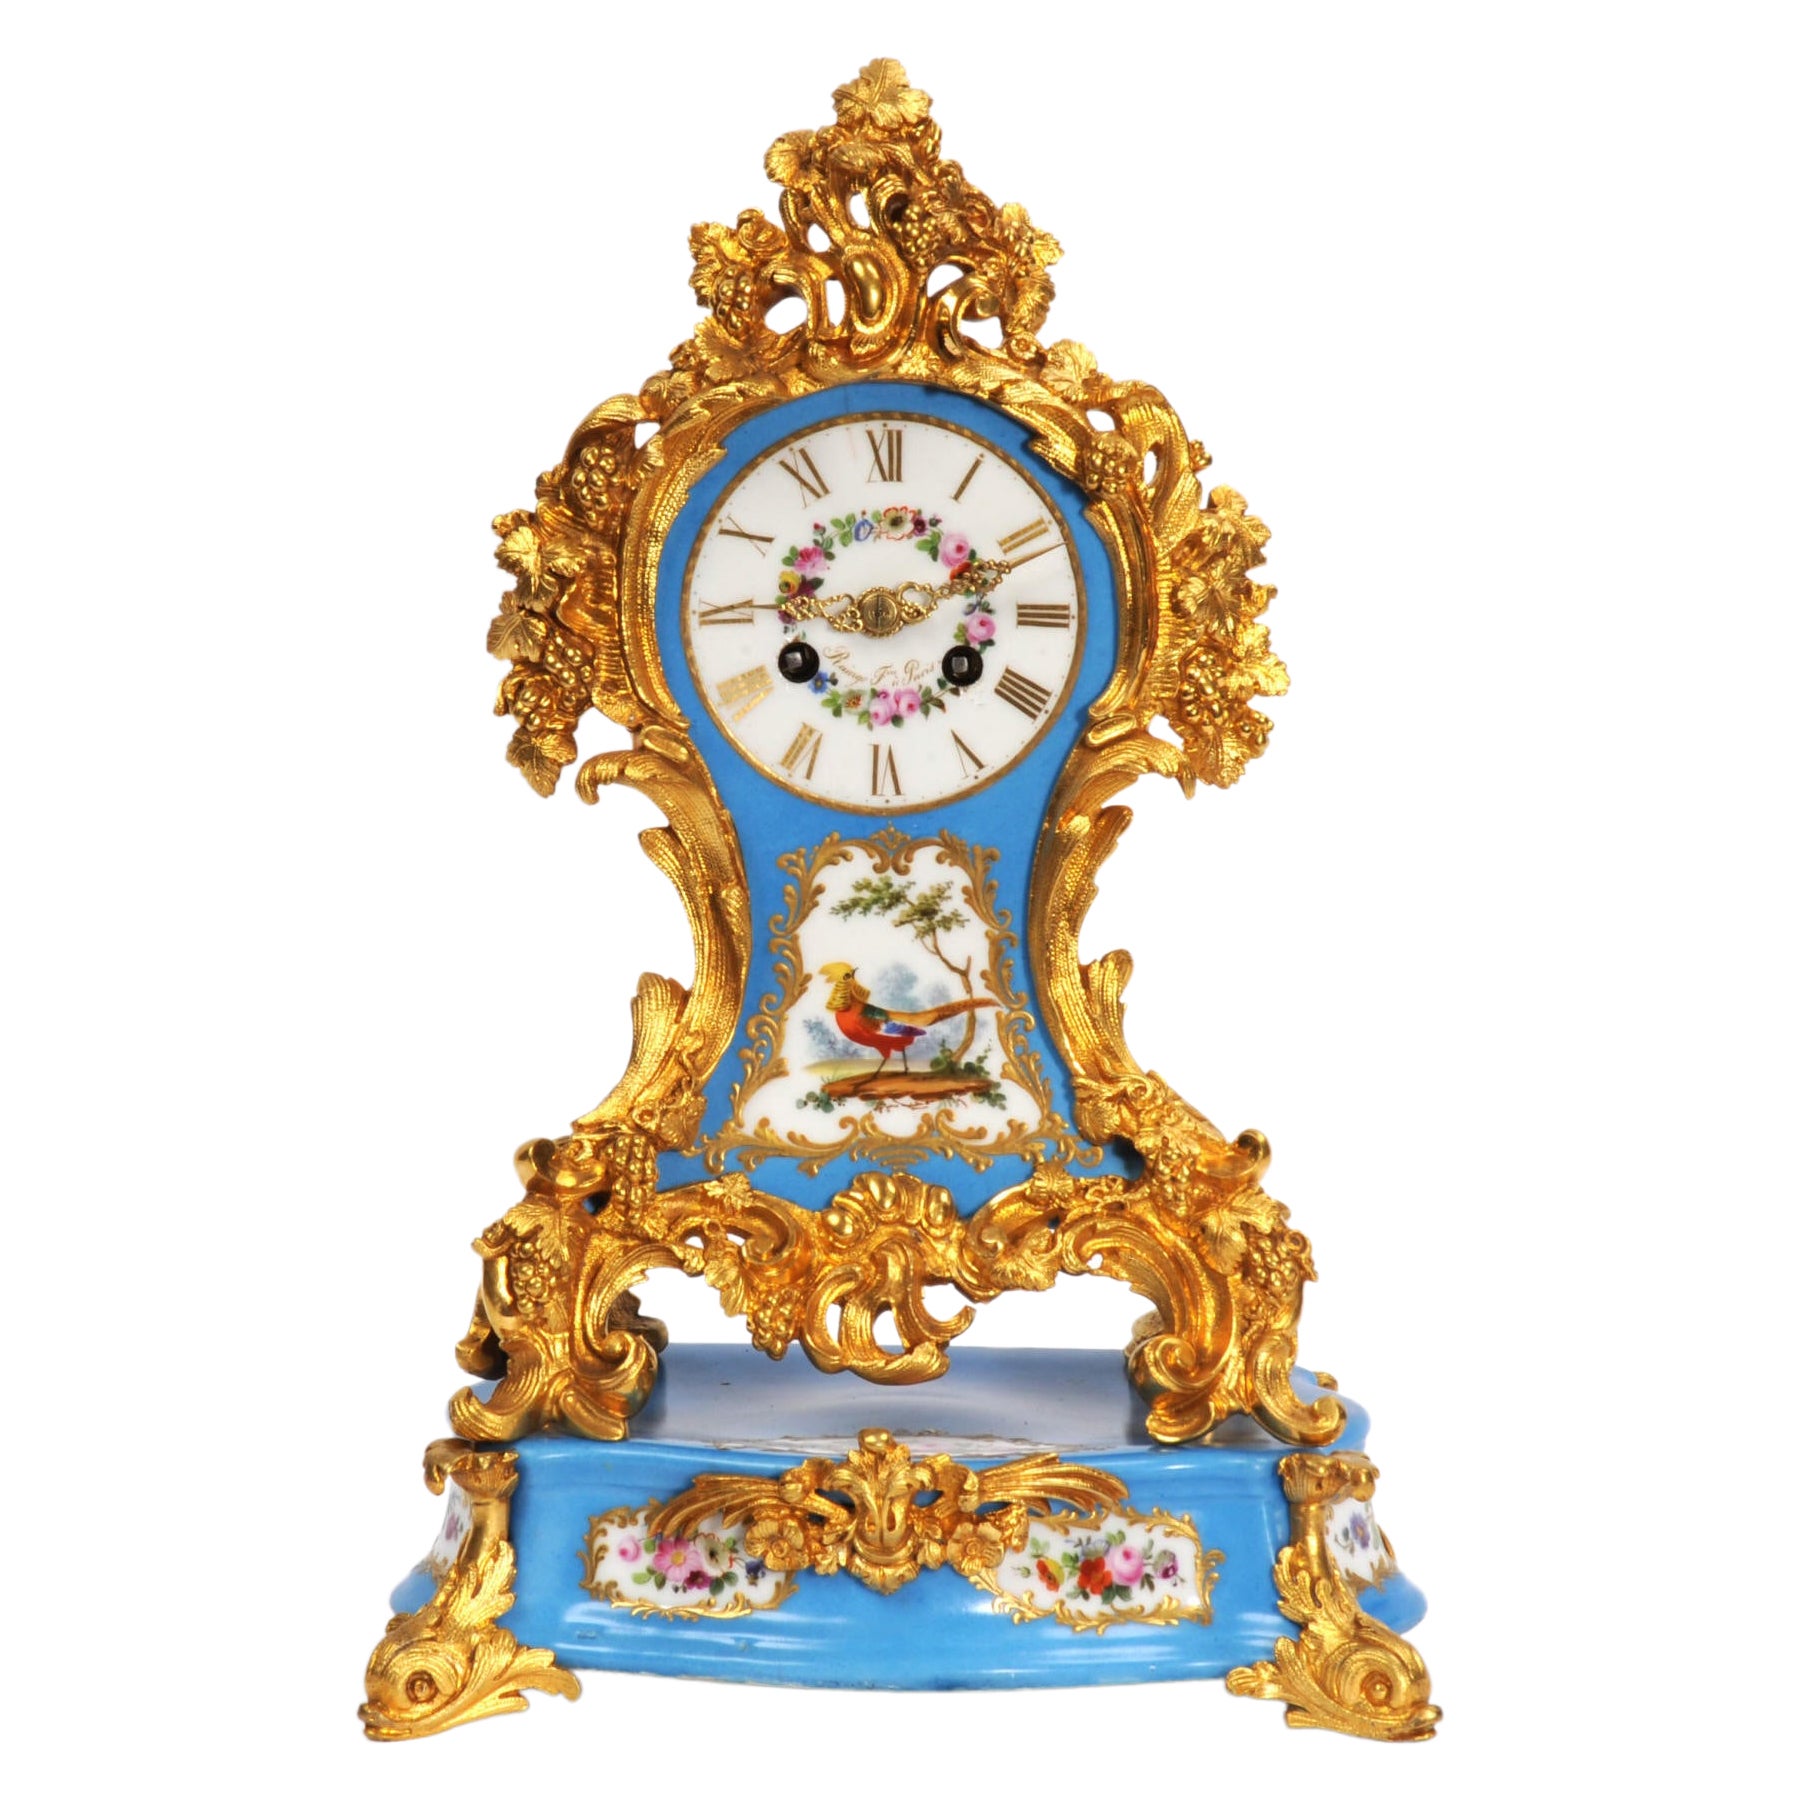 Early Ormolu and Porcelain Antique French Clock by Raingo Freres